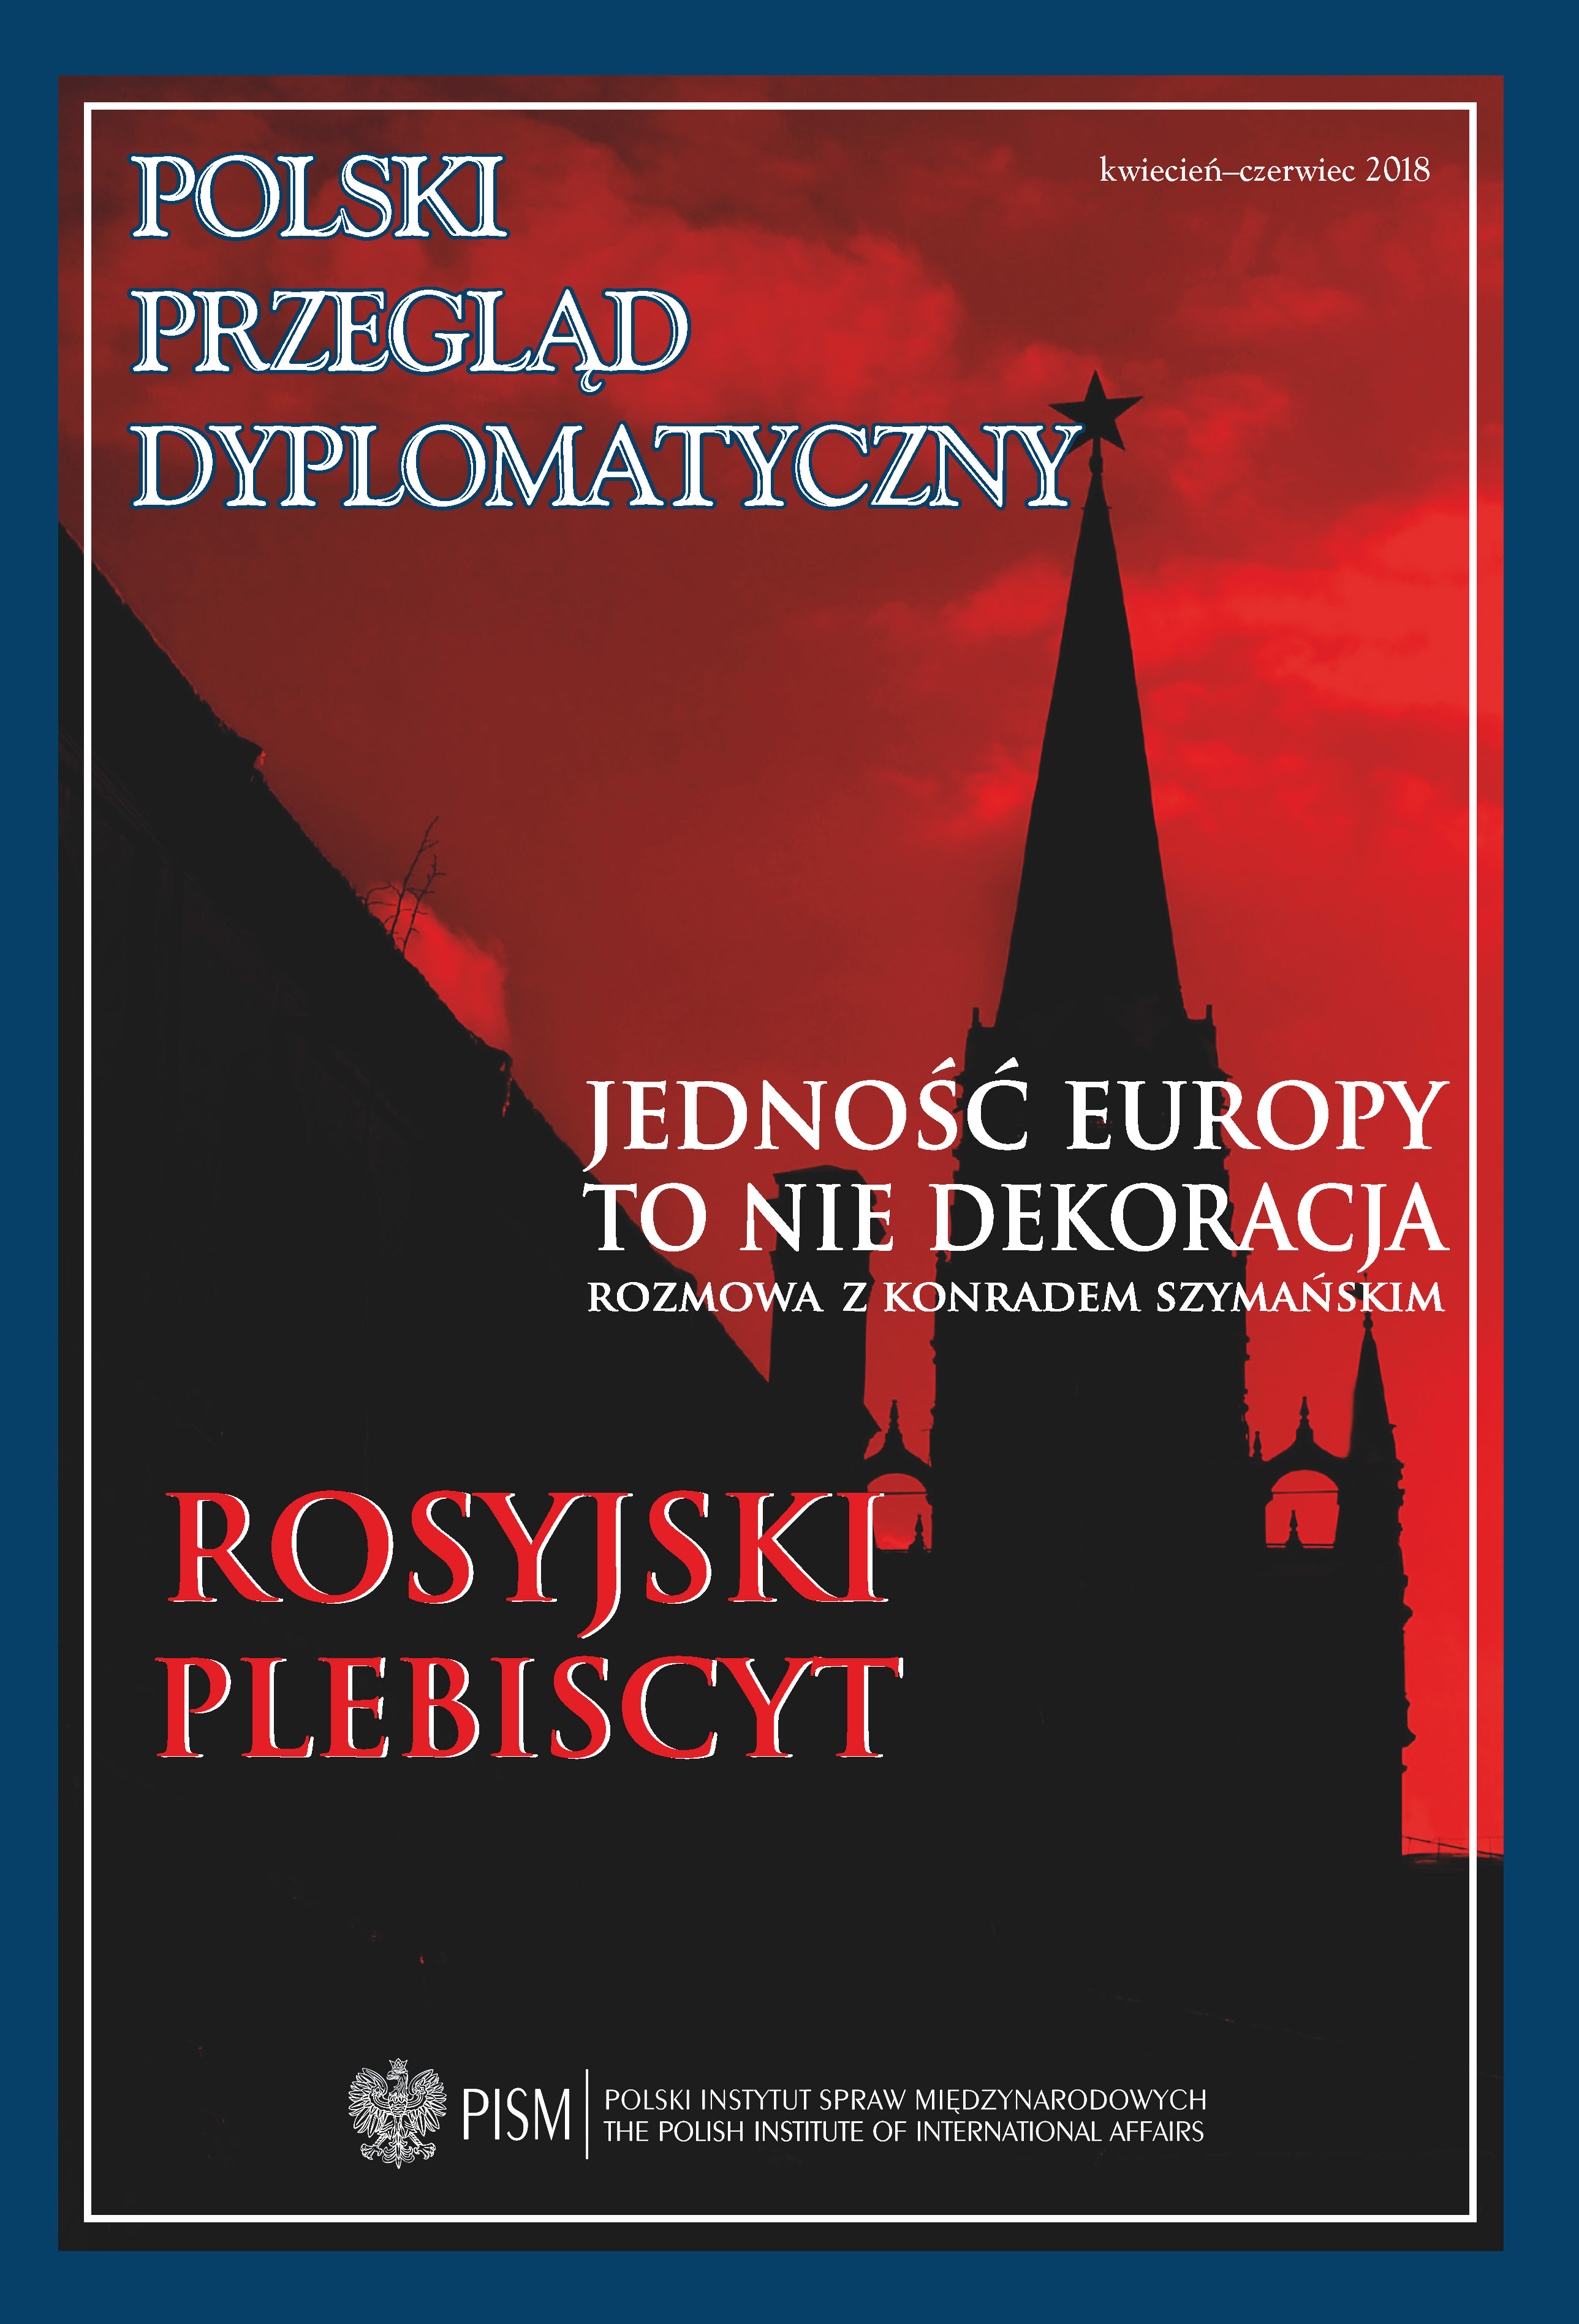 Bernese Group  - diplomats of the Republic of Poland helping Jews. Lecture by Polish Ambassador to Switzerland, Jakub Kumoch, delivered on 4 February 2018, at the Shoah Museum in Paris Cover Image